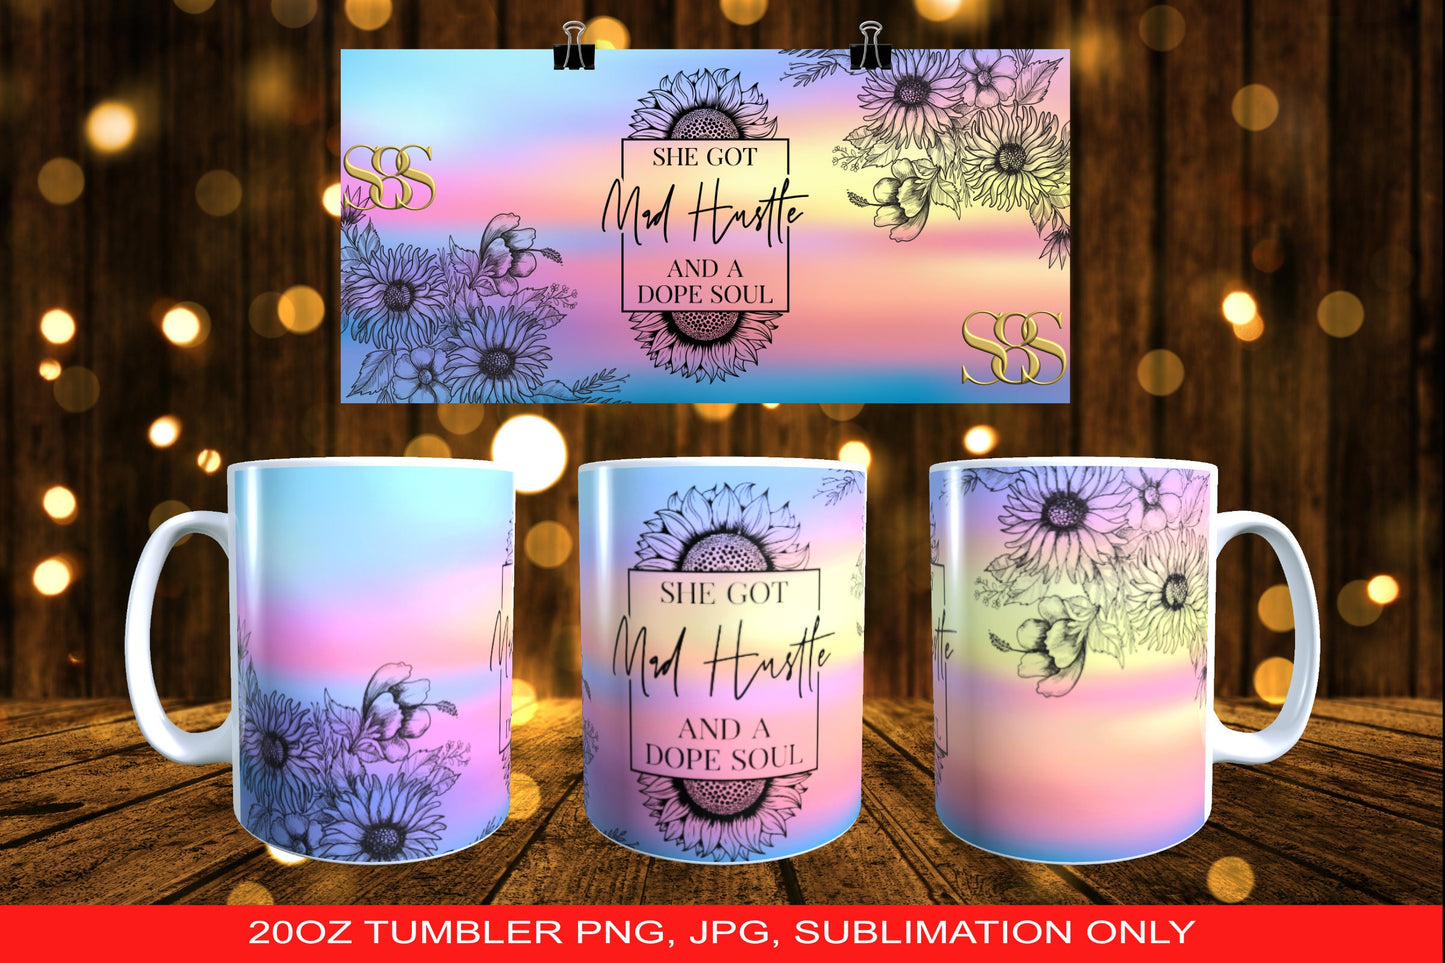 She Got A Mad Hustle And A Dope Soul Sublimation Bundle T-shirt, Tumbler and Mug Designs PNG and JPG ONLY